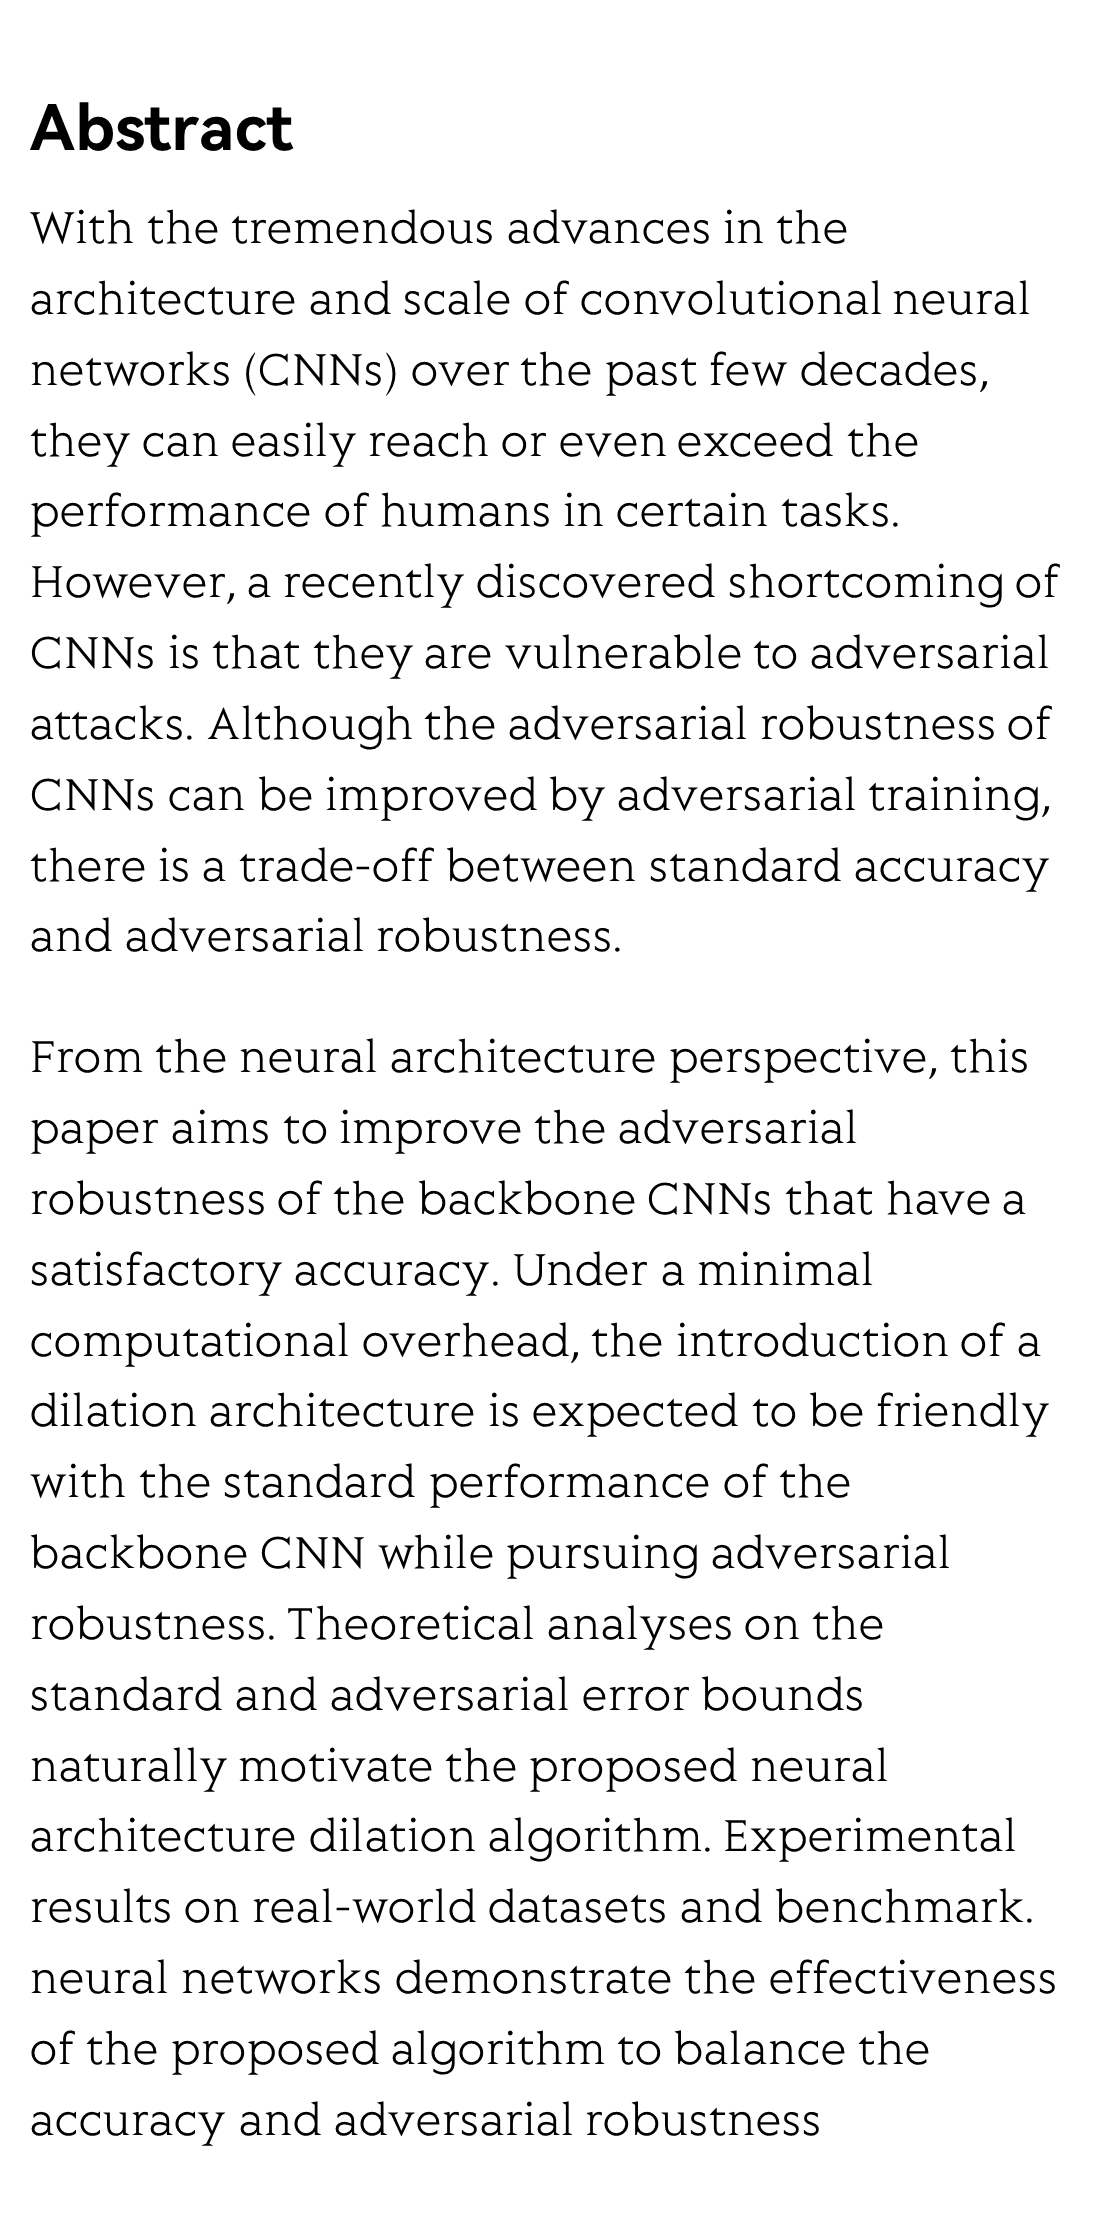 Neural Architecture Dilation for Adversarial Robustness_2